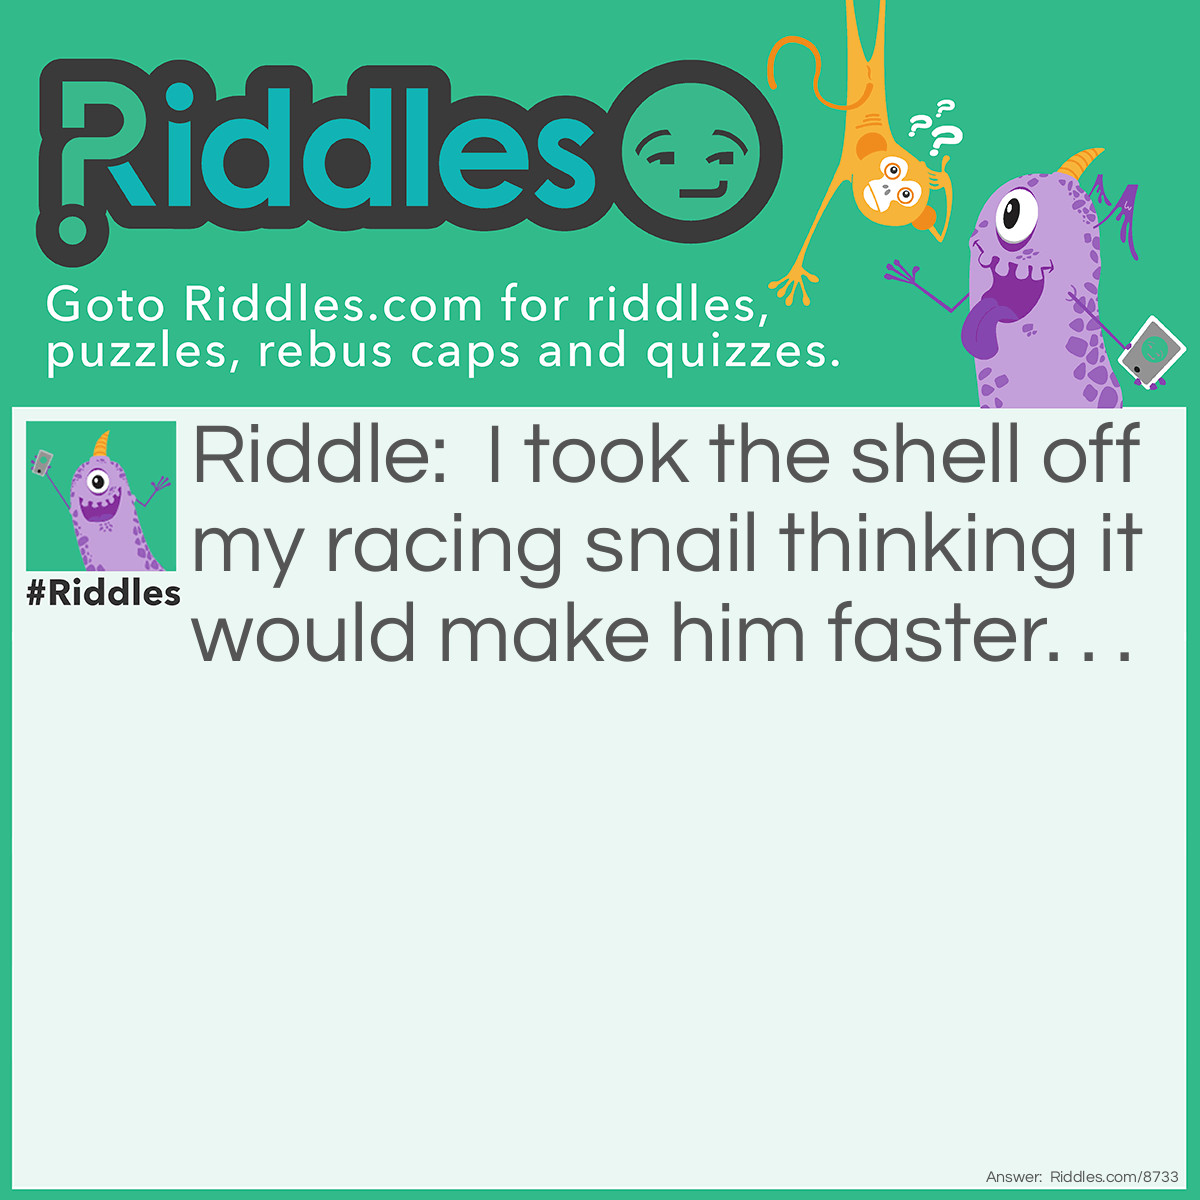 Riddle: I took the shell off my racing snail thinking it would make him faster. . . Answer: . . . If anything, it made him more sluggish